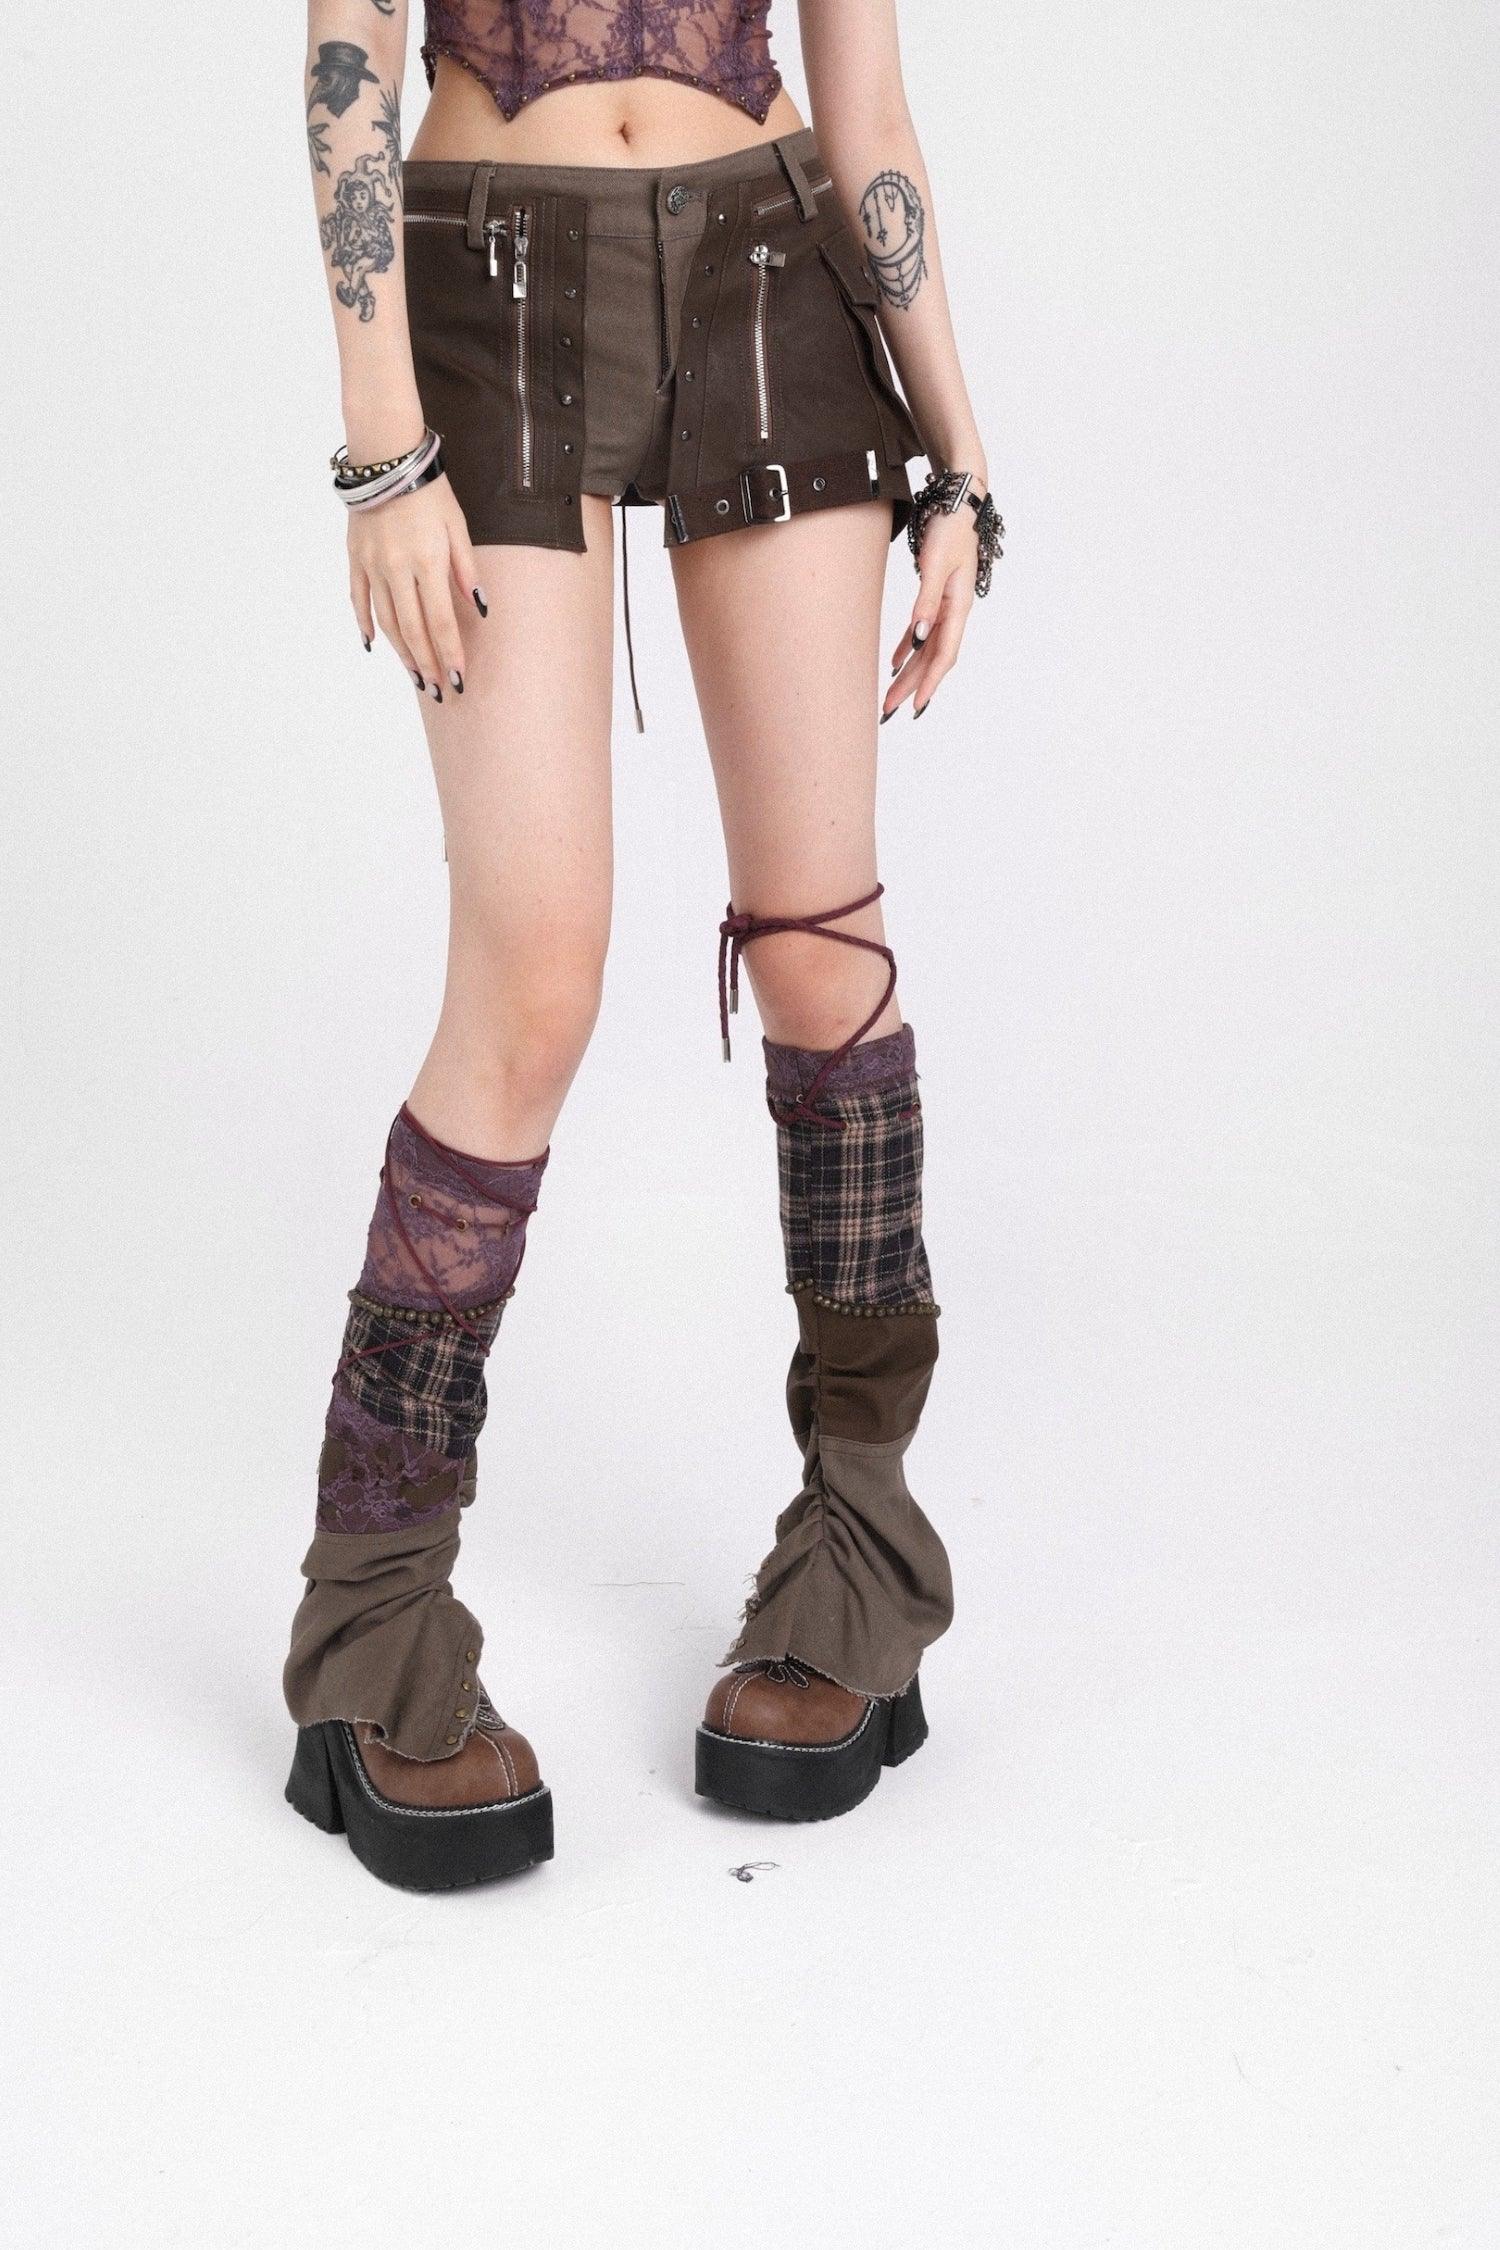 Patched Rivet Leg Sleeves - Pixie Rebels